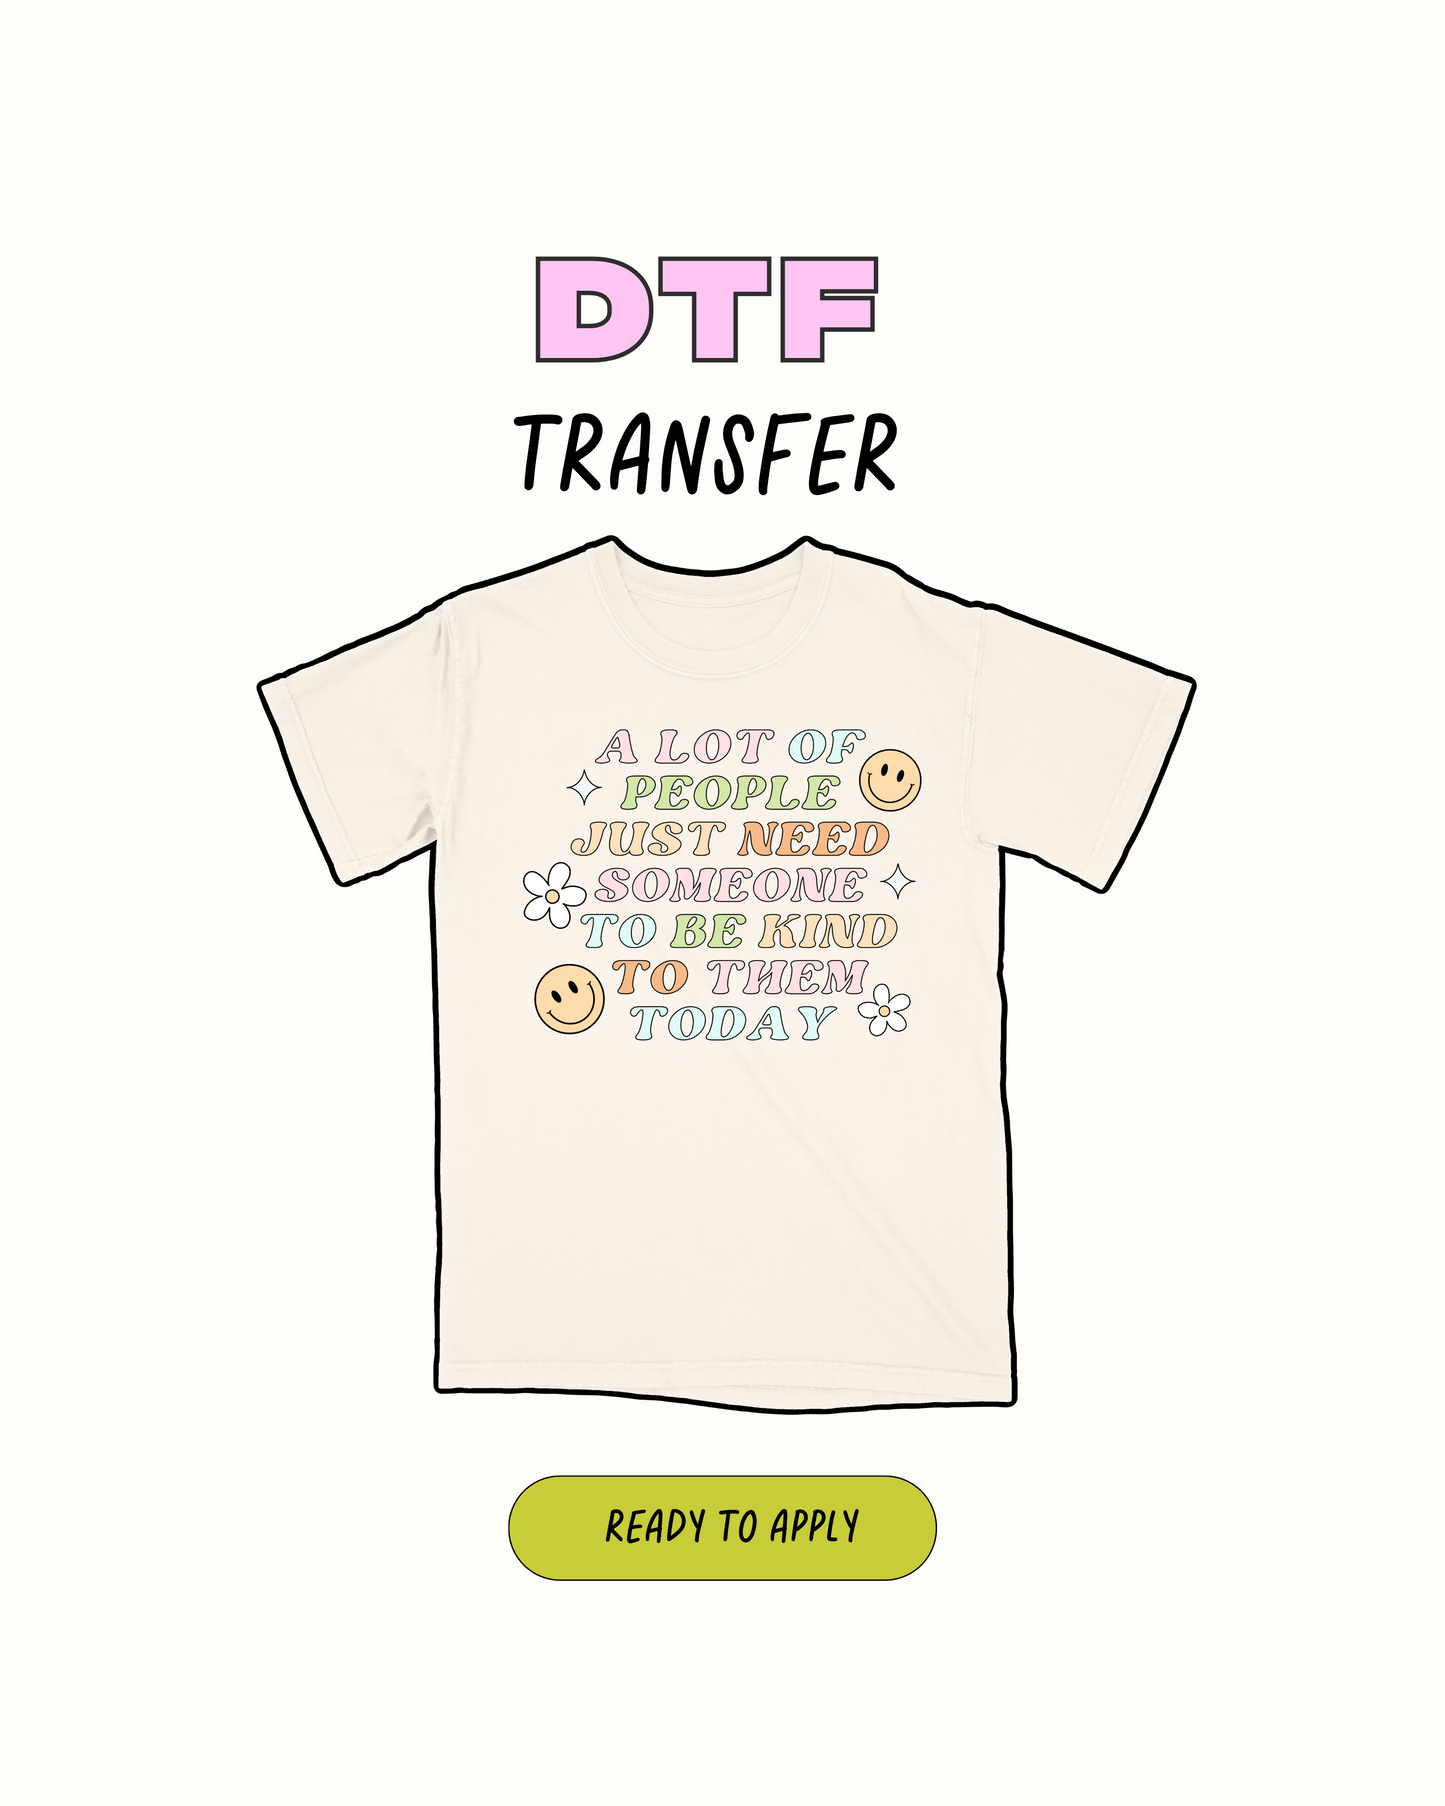 A lot of people - DTF Transfer